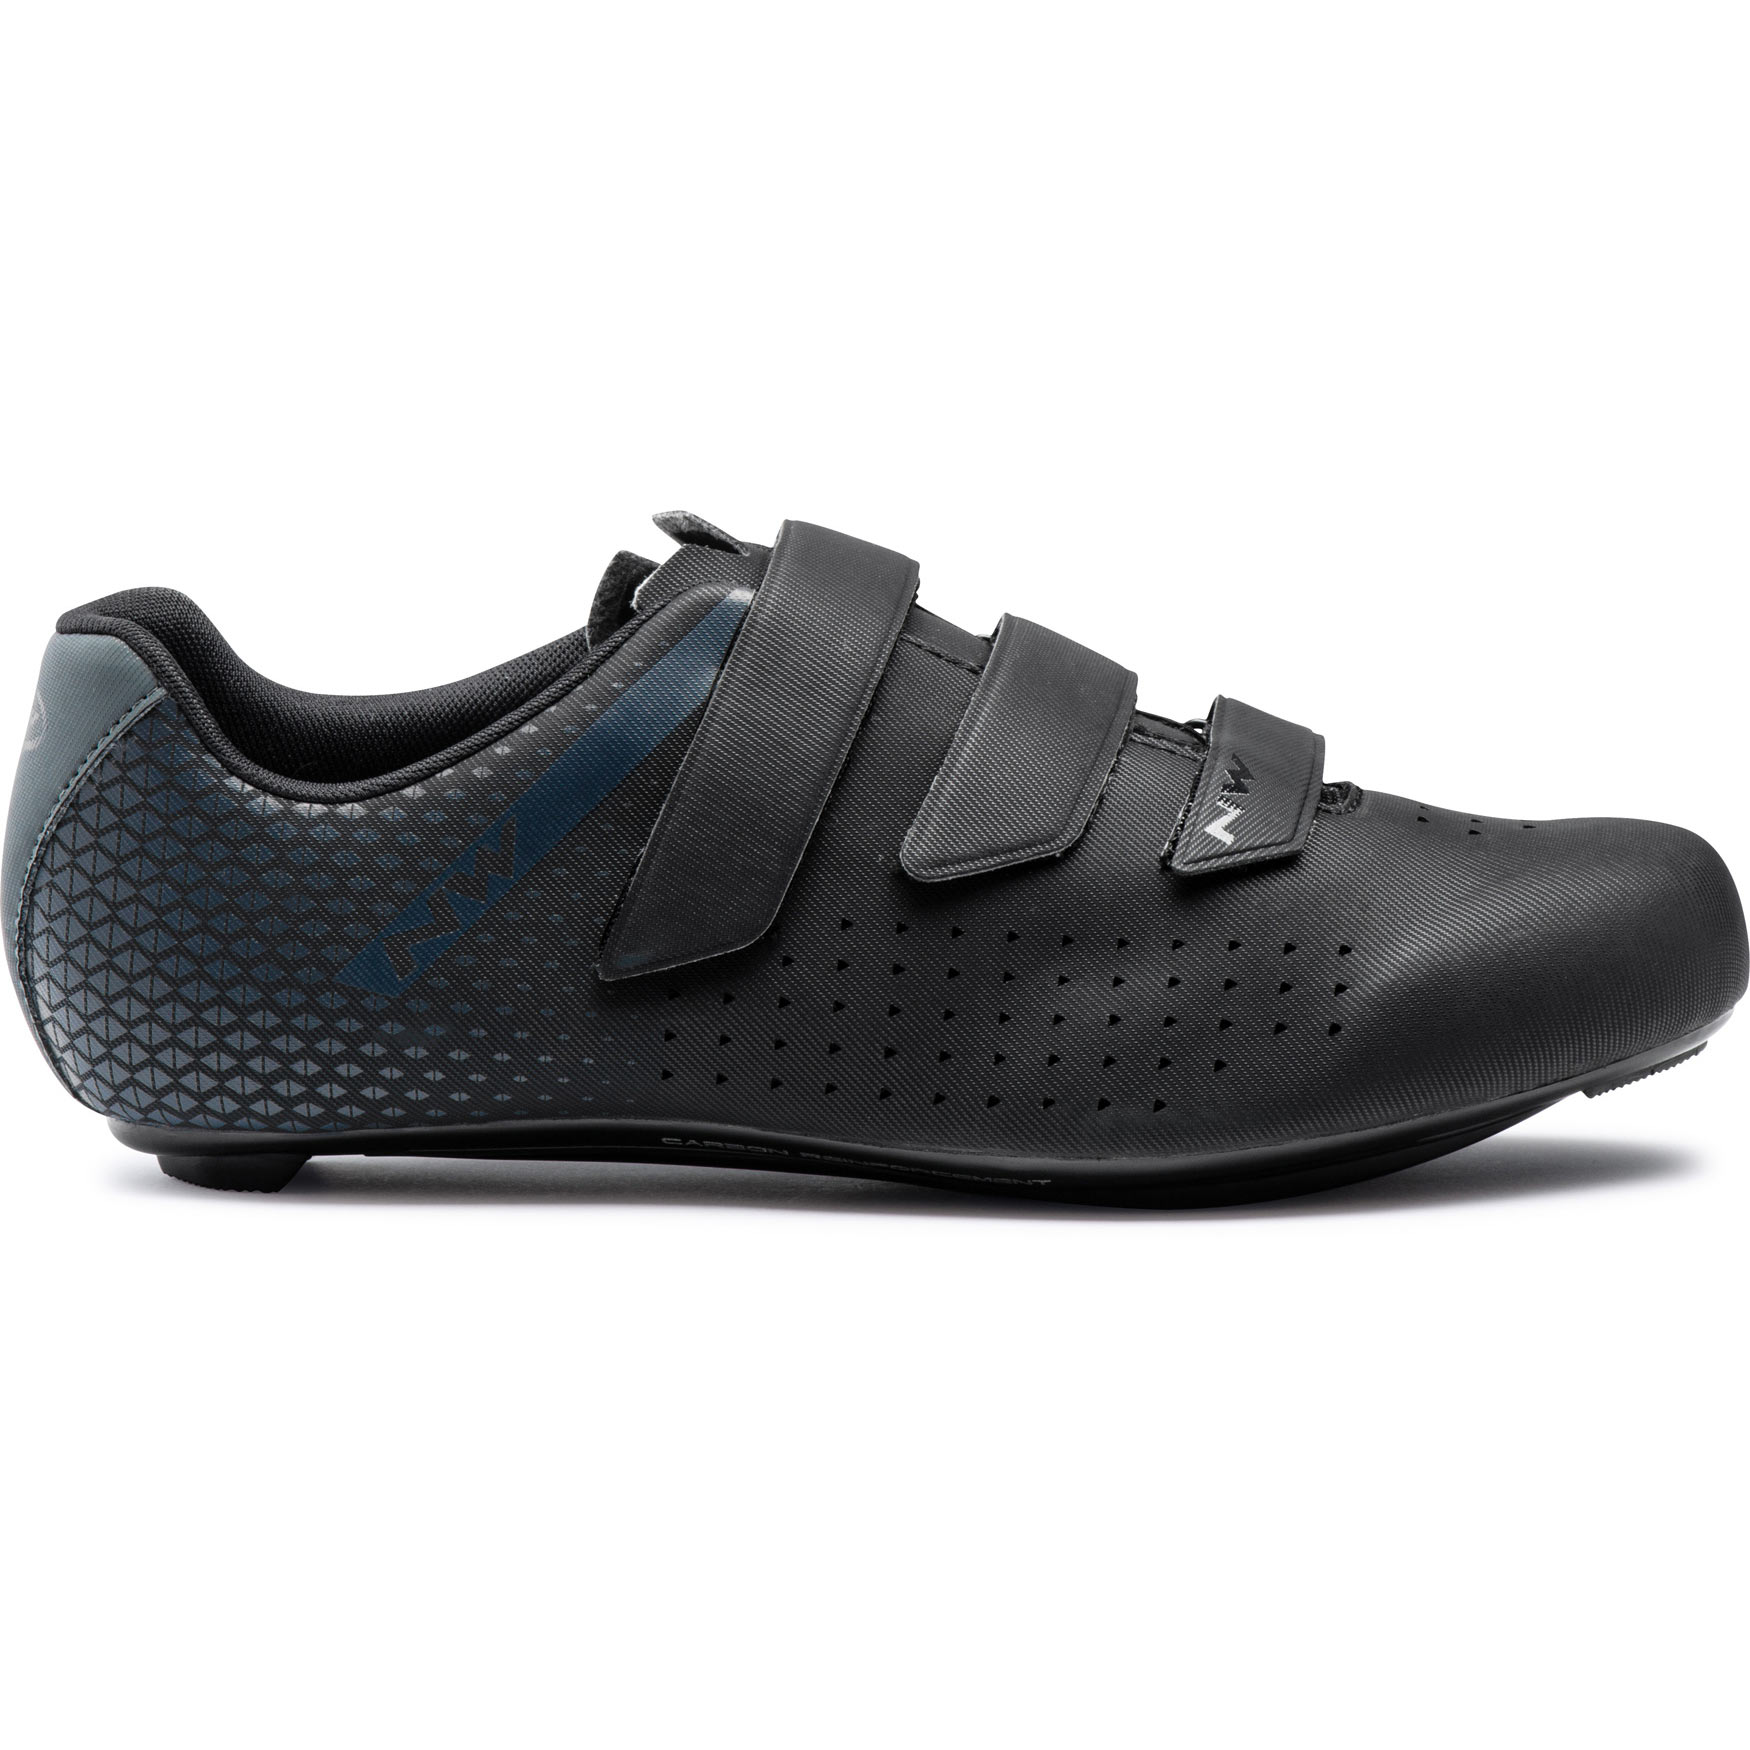 Image of Northwave Core 2 Road Shoe - black/anthracite 19